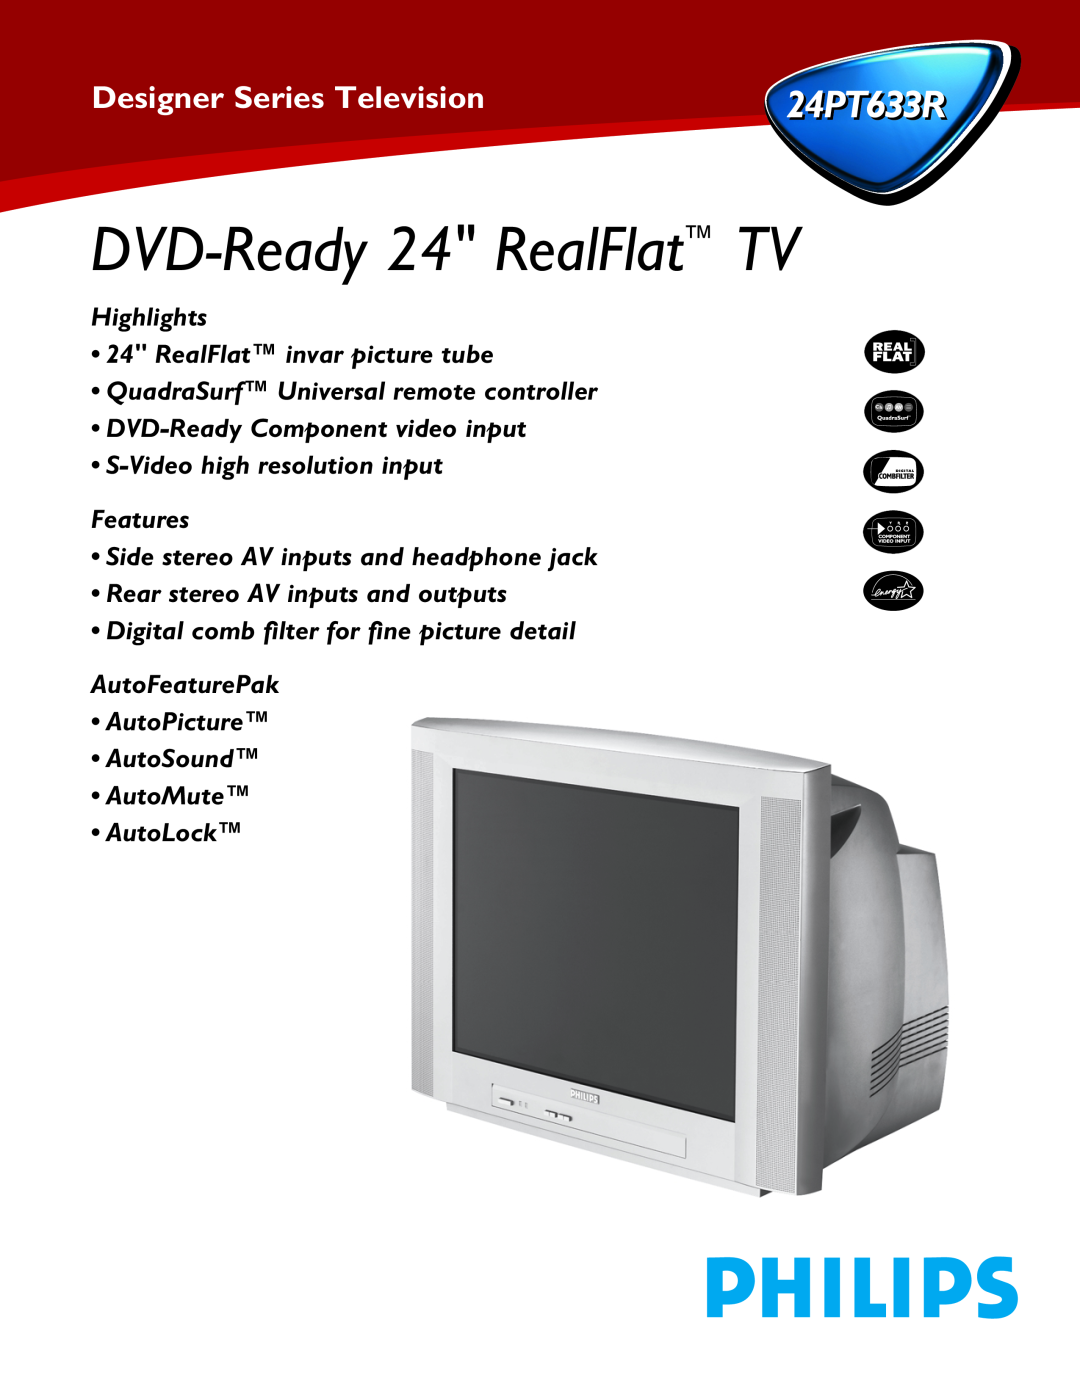 Philips 24PT633R manual DVD-Ready 24 RealFlat TV, Designer Series Television, Highlights 24 RealFlat invar picture tube 